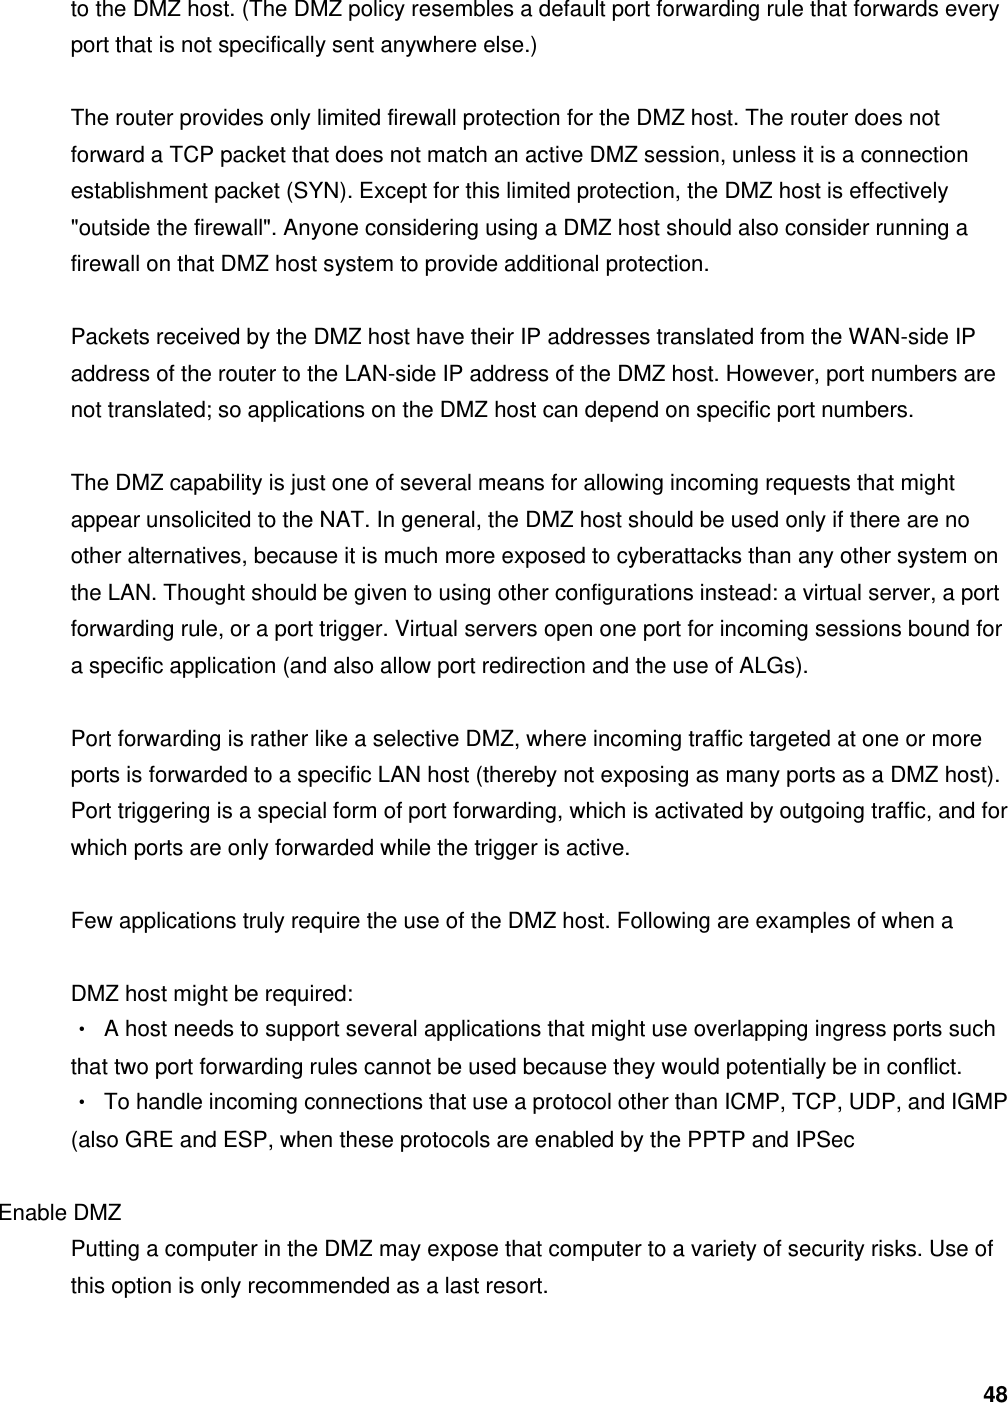 48 to the DMZ host. (The DMZ policy resembles a default port forwarding rule that forwards every port that is not specifically sent anywhere else.)    The router provides only limited firewall protection for the DMZ host. The router does not forward a TCP packet that does not match an active DMZ session, unless it is a connection establishment packet (SYN). Except for this limited protection, the DMZ host is effectively &quot;outside the firewall&quot;. Anyone considering using a DMZ host should also consider running a firewall on that DMZ host system to provide additional protection.    Packets received by the DMZ host have their IP addresses translated from the WAN-side IP address of the router to the LAN-side IP address of the DMZ host. However, port numbers are not translated; so applications on the DMZ host can depend on specific port numbers.    The DMZ capability is just one of several means for allowing incoming requests that might appear unsolicited to the NAT. In general, the DMZ host should be used only if there are no other alternatives, because it is much more exposed to cyberattacks than any other system on the LAN. Thought should be given to using other configurations instead: a virtual server, a port forwarding rule, or a port trigger. Virtual servers open one port for incoming sessions bound for a specific application (and also allow port redirection and the use of ALGs).    Port forwarding is rather like a selective DMZ, where incoming traffic targeted at one or more ports is forwarded to a specific LAN host (thereby not exposing as many ports as a DMZ host). Port triggering is a special form of port forwarding, which is activated by outgoing traffic, and for which ports are only forwarded while the trigger is active.    Few applications truly require the use of the DMZ host. Following are examples of when a    DMZ host might be required:   ‧  A host needs to support several applications that might use overlapping ingress ports such that two port forwarding rules cannot be used because they would potentially be in conflict.   ‧  To handle incoming connections that use a protocol other than ICMP, TCP, UDP, and IGMP (also GRE and ESP, when these protocols are enabled by the PPTP and IPSec    Enable DMZ   Putting a computer in the DMZ may expose that computer to a variety of security risks. Use of this option is only recommended as a last resort.    